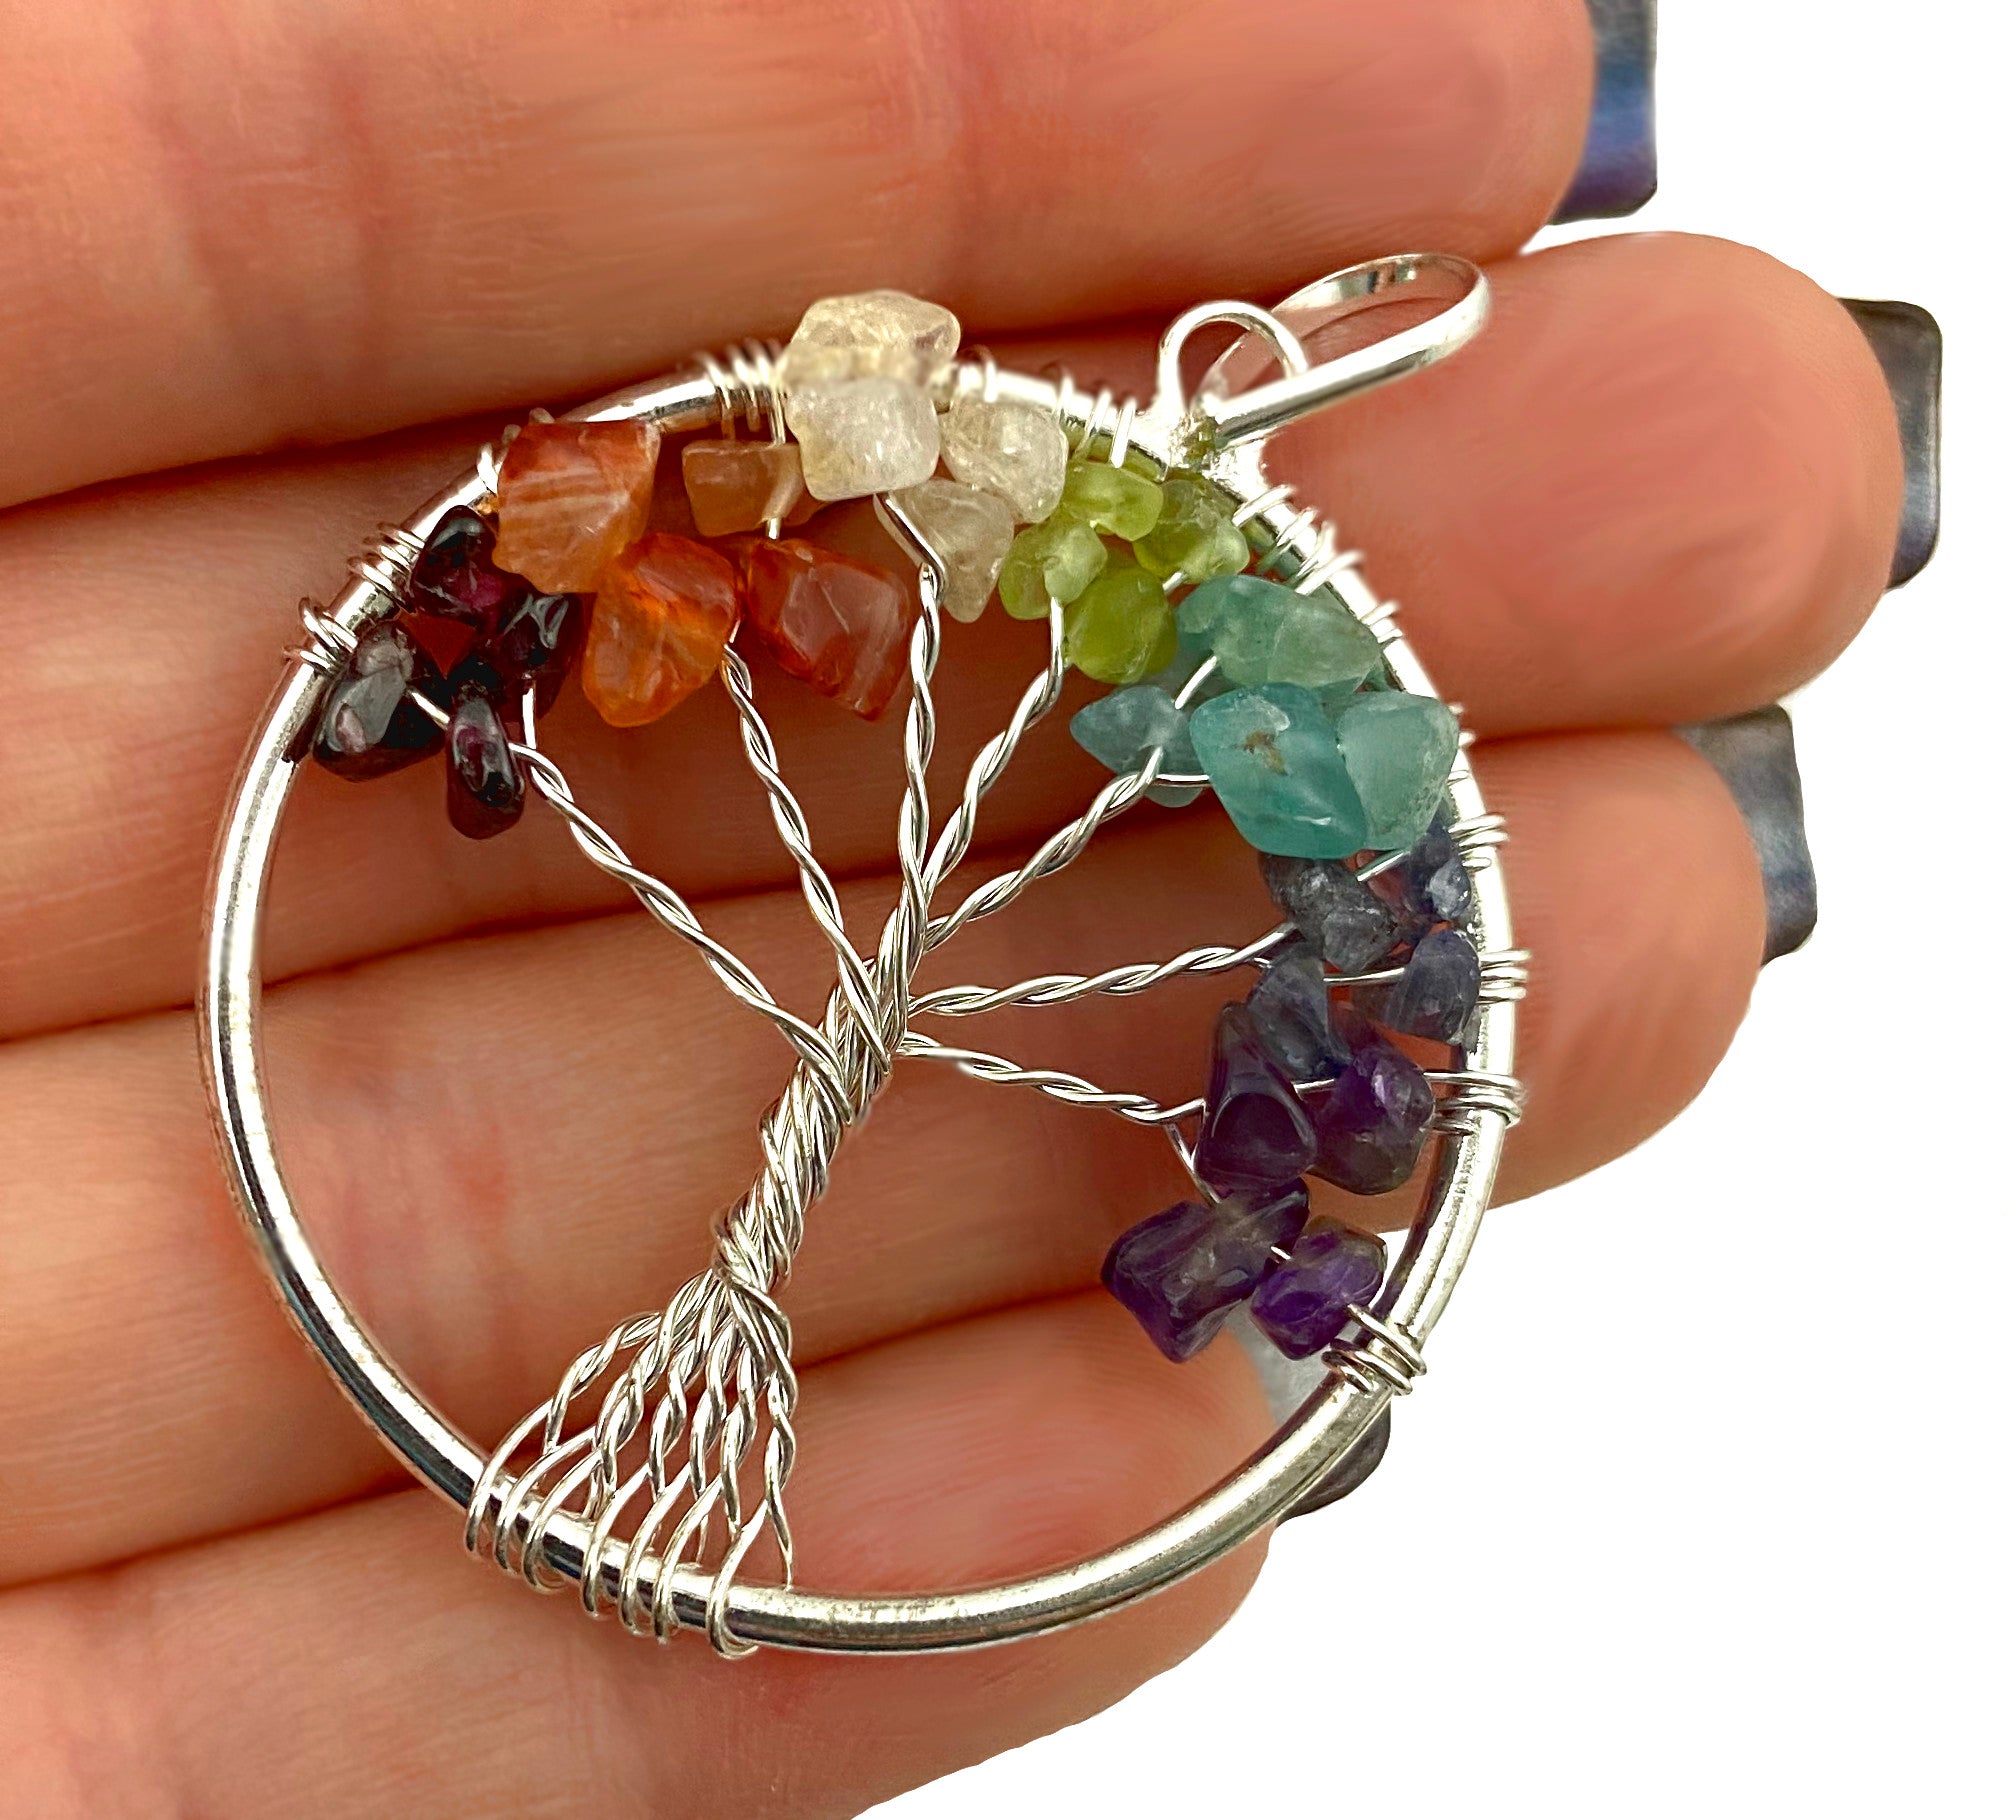 Up To 81% Off on 7 Chakra Healing Crystal Neck... | Groupon Goods